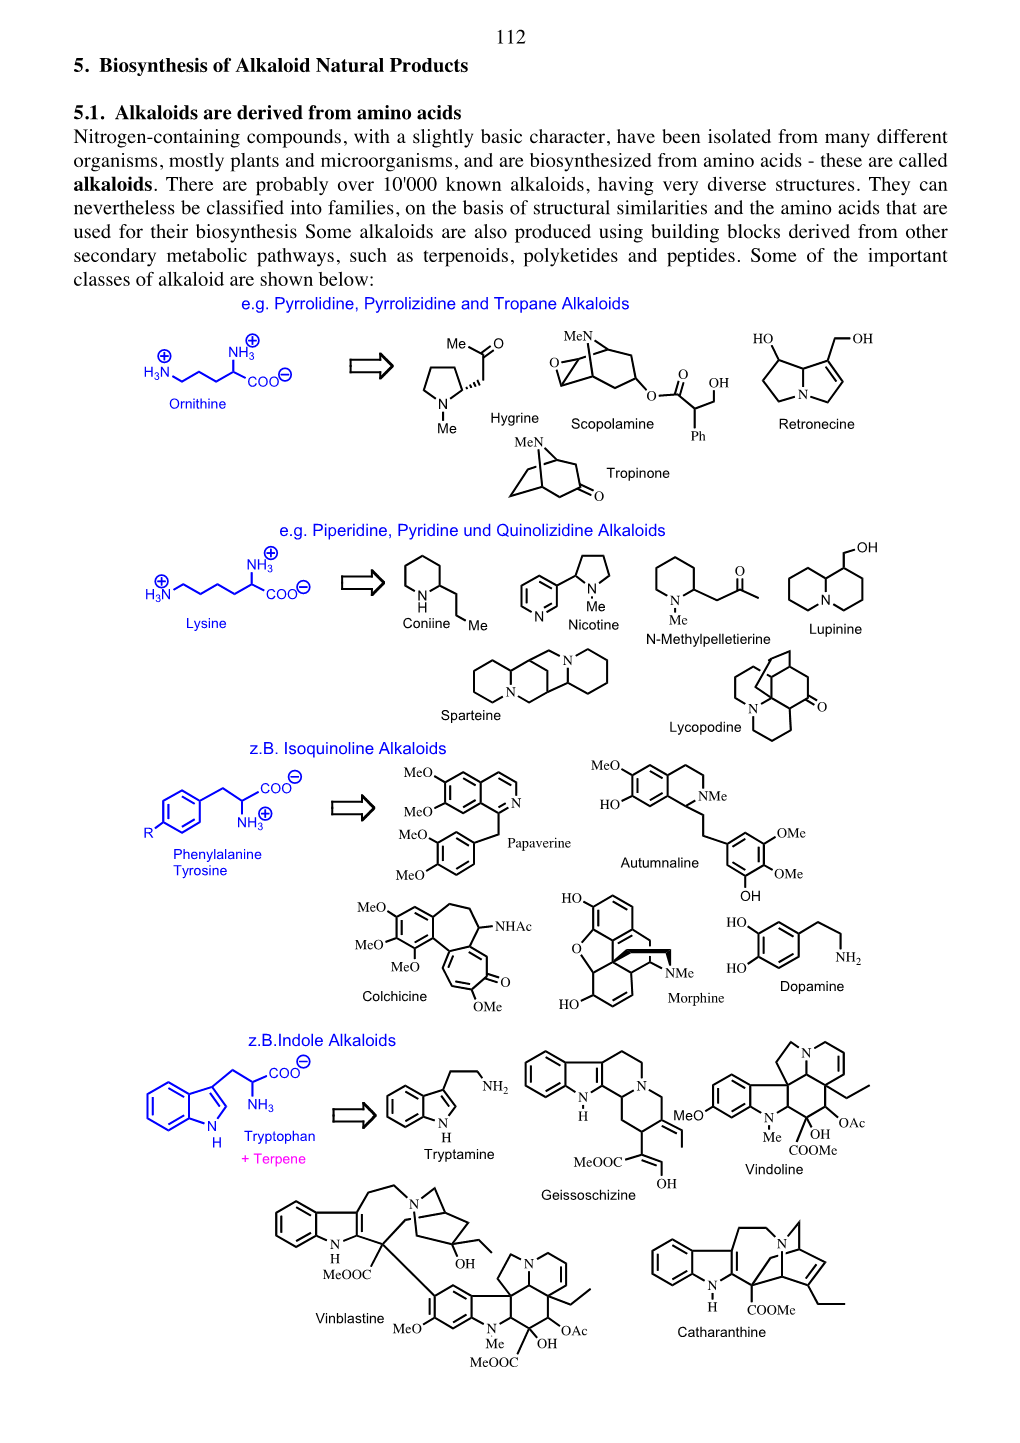 Biosynthesis of Natural Products